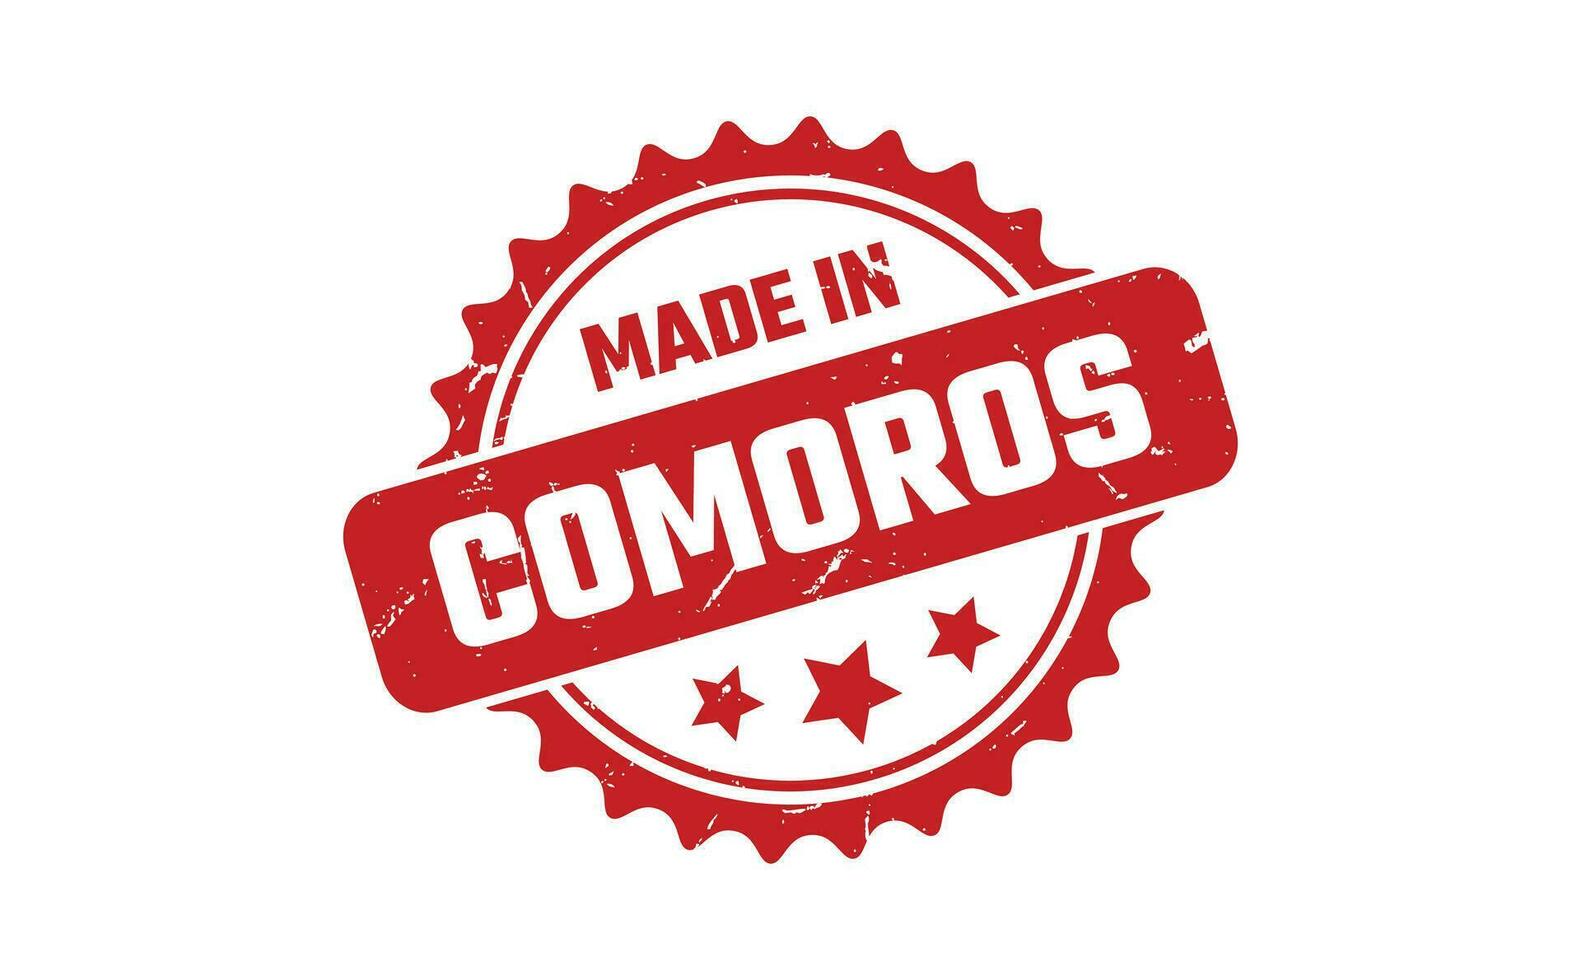 Made In Comoros Rubber Stamp vector